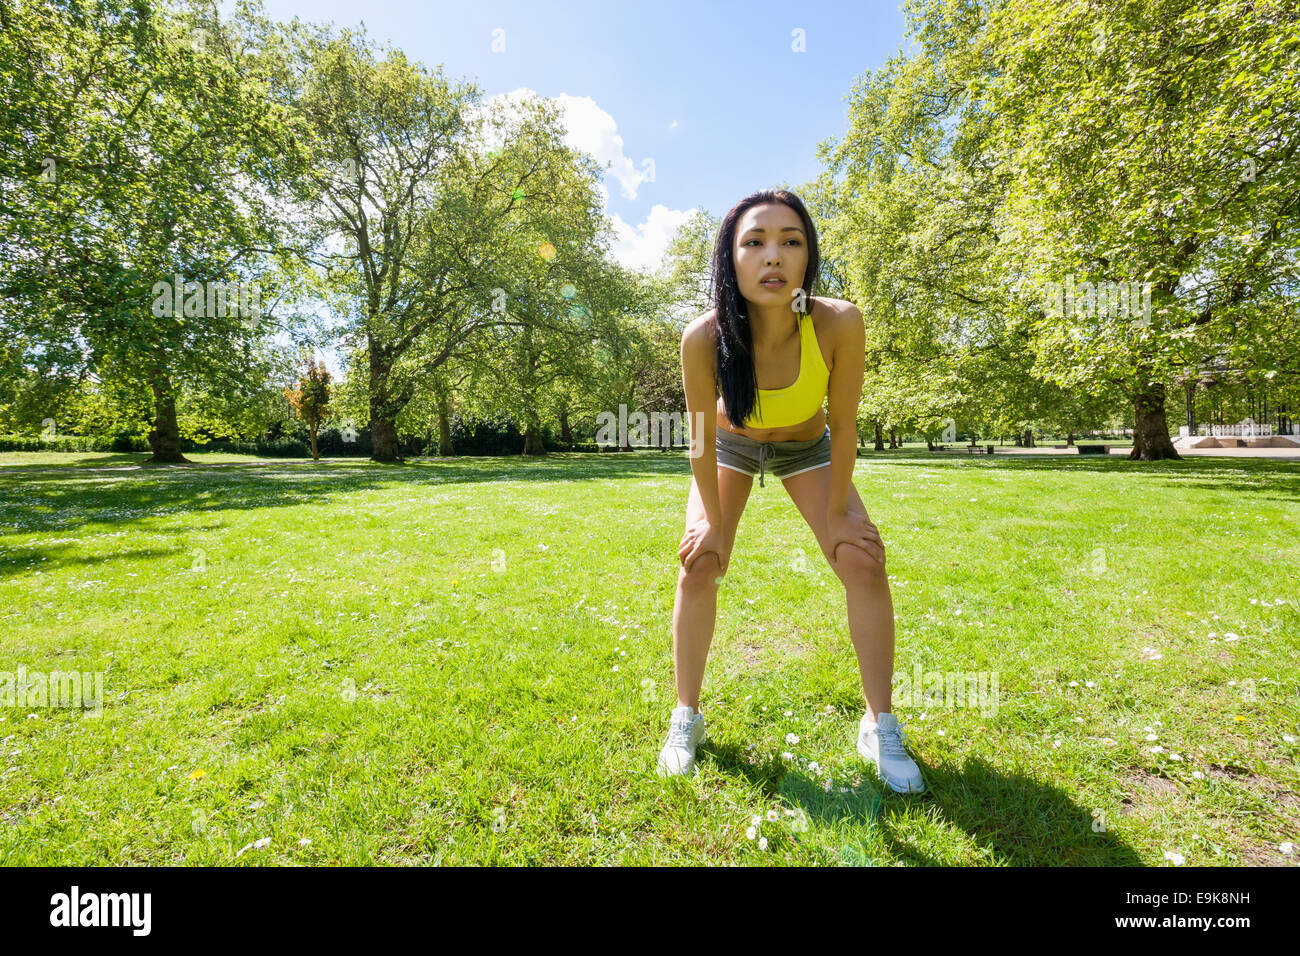 Full length of tired fit woman taking a break while exercising in park Stock Photo